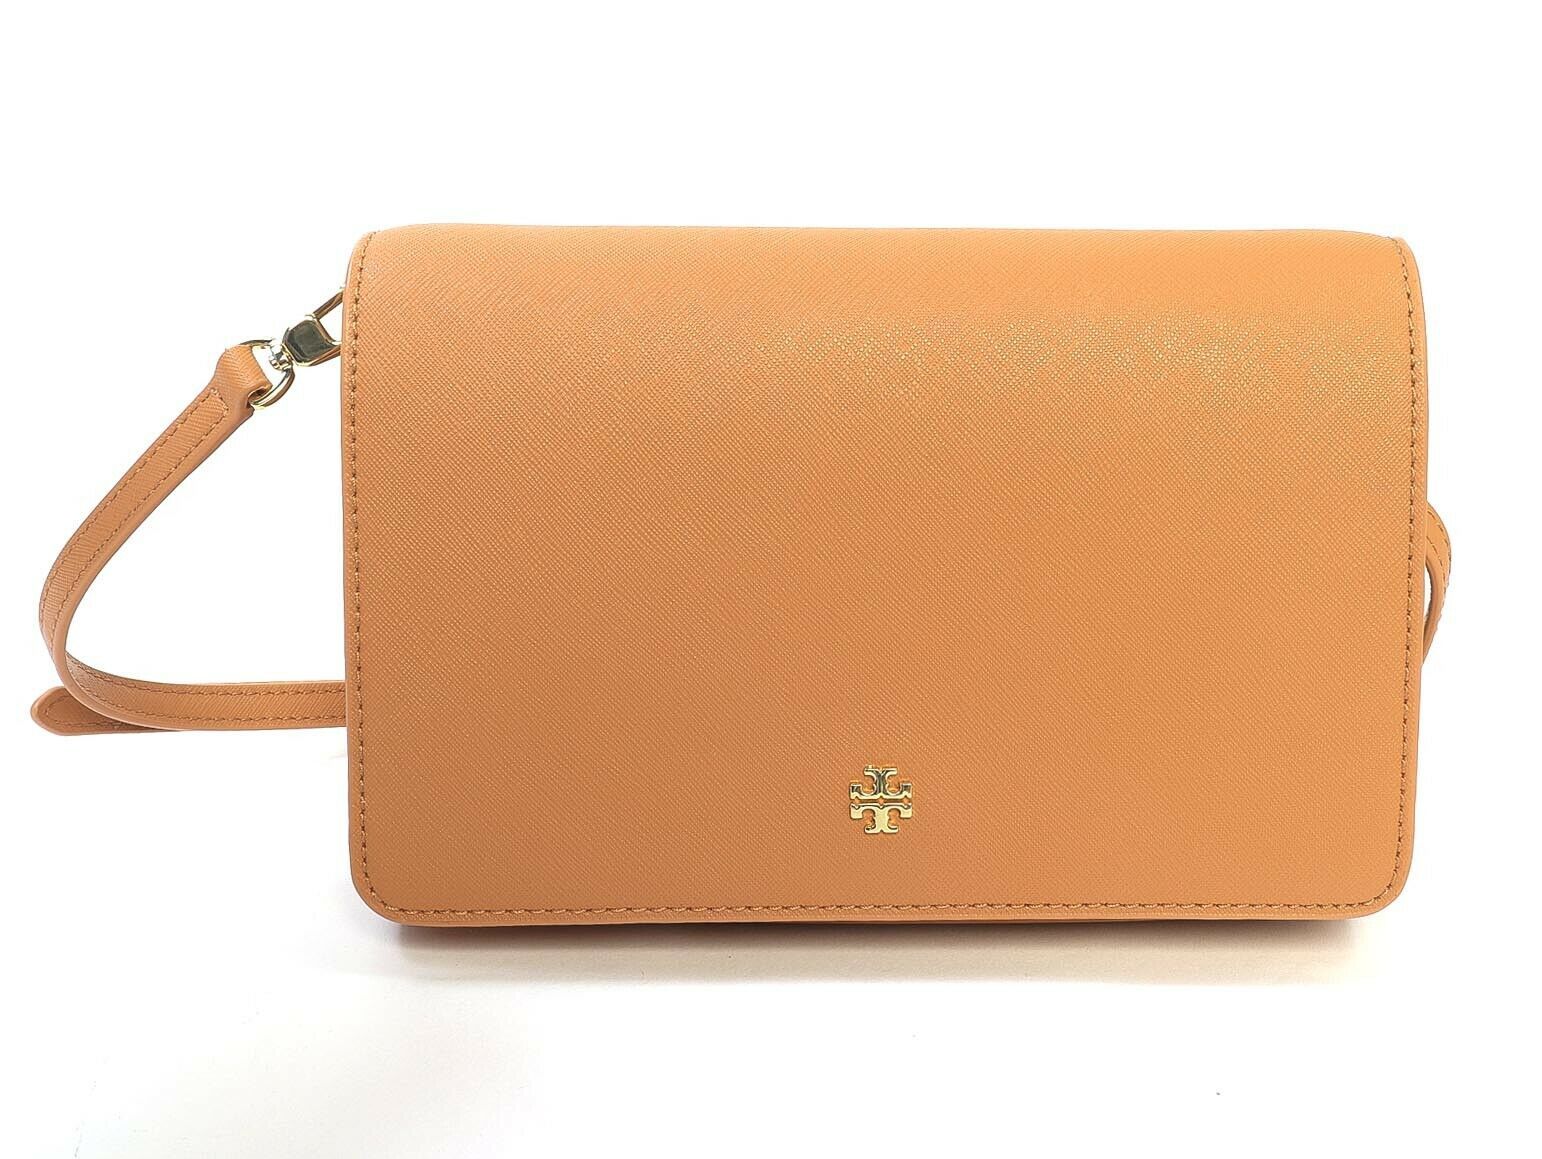 Tory Burch Cassia Rounded Emerson Leather Crossbody Bag